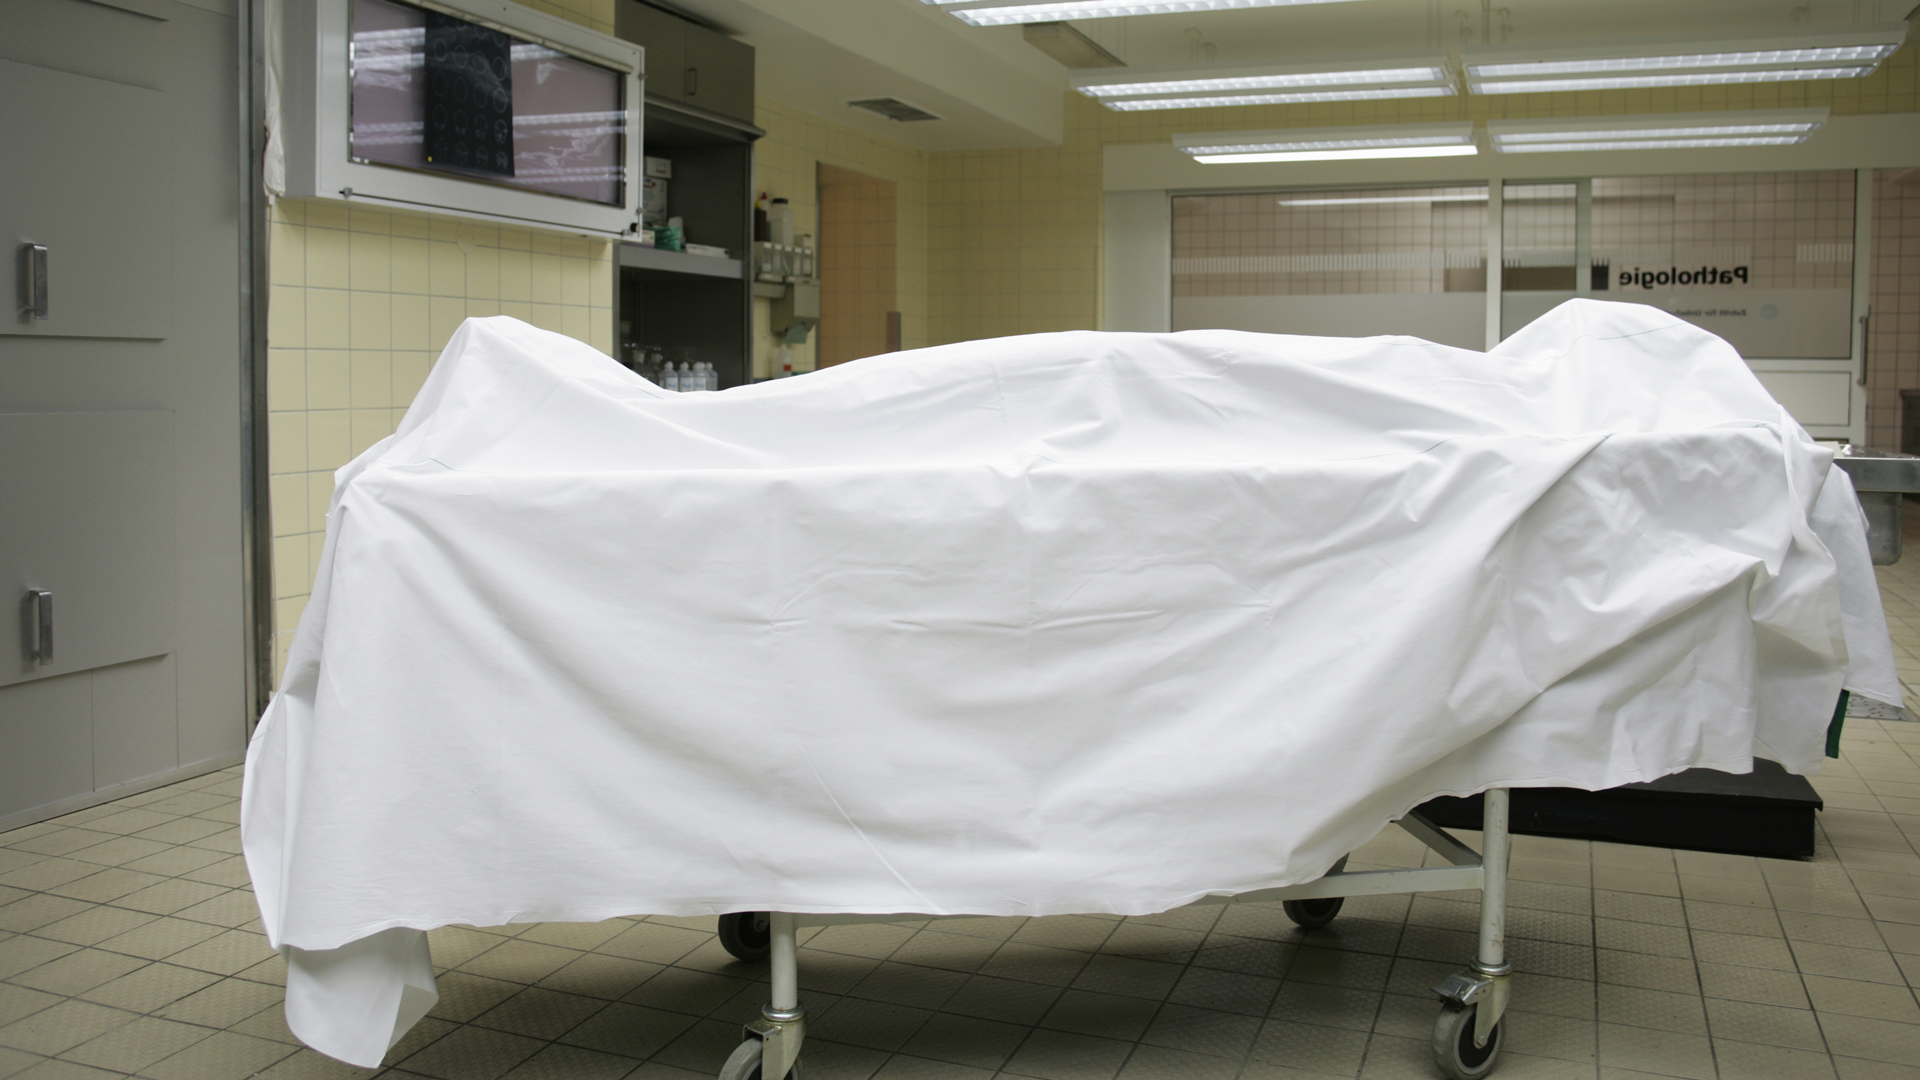 Inside the Mind of the Dead: What Are Psychological Autopsies?